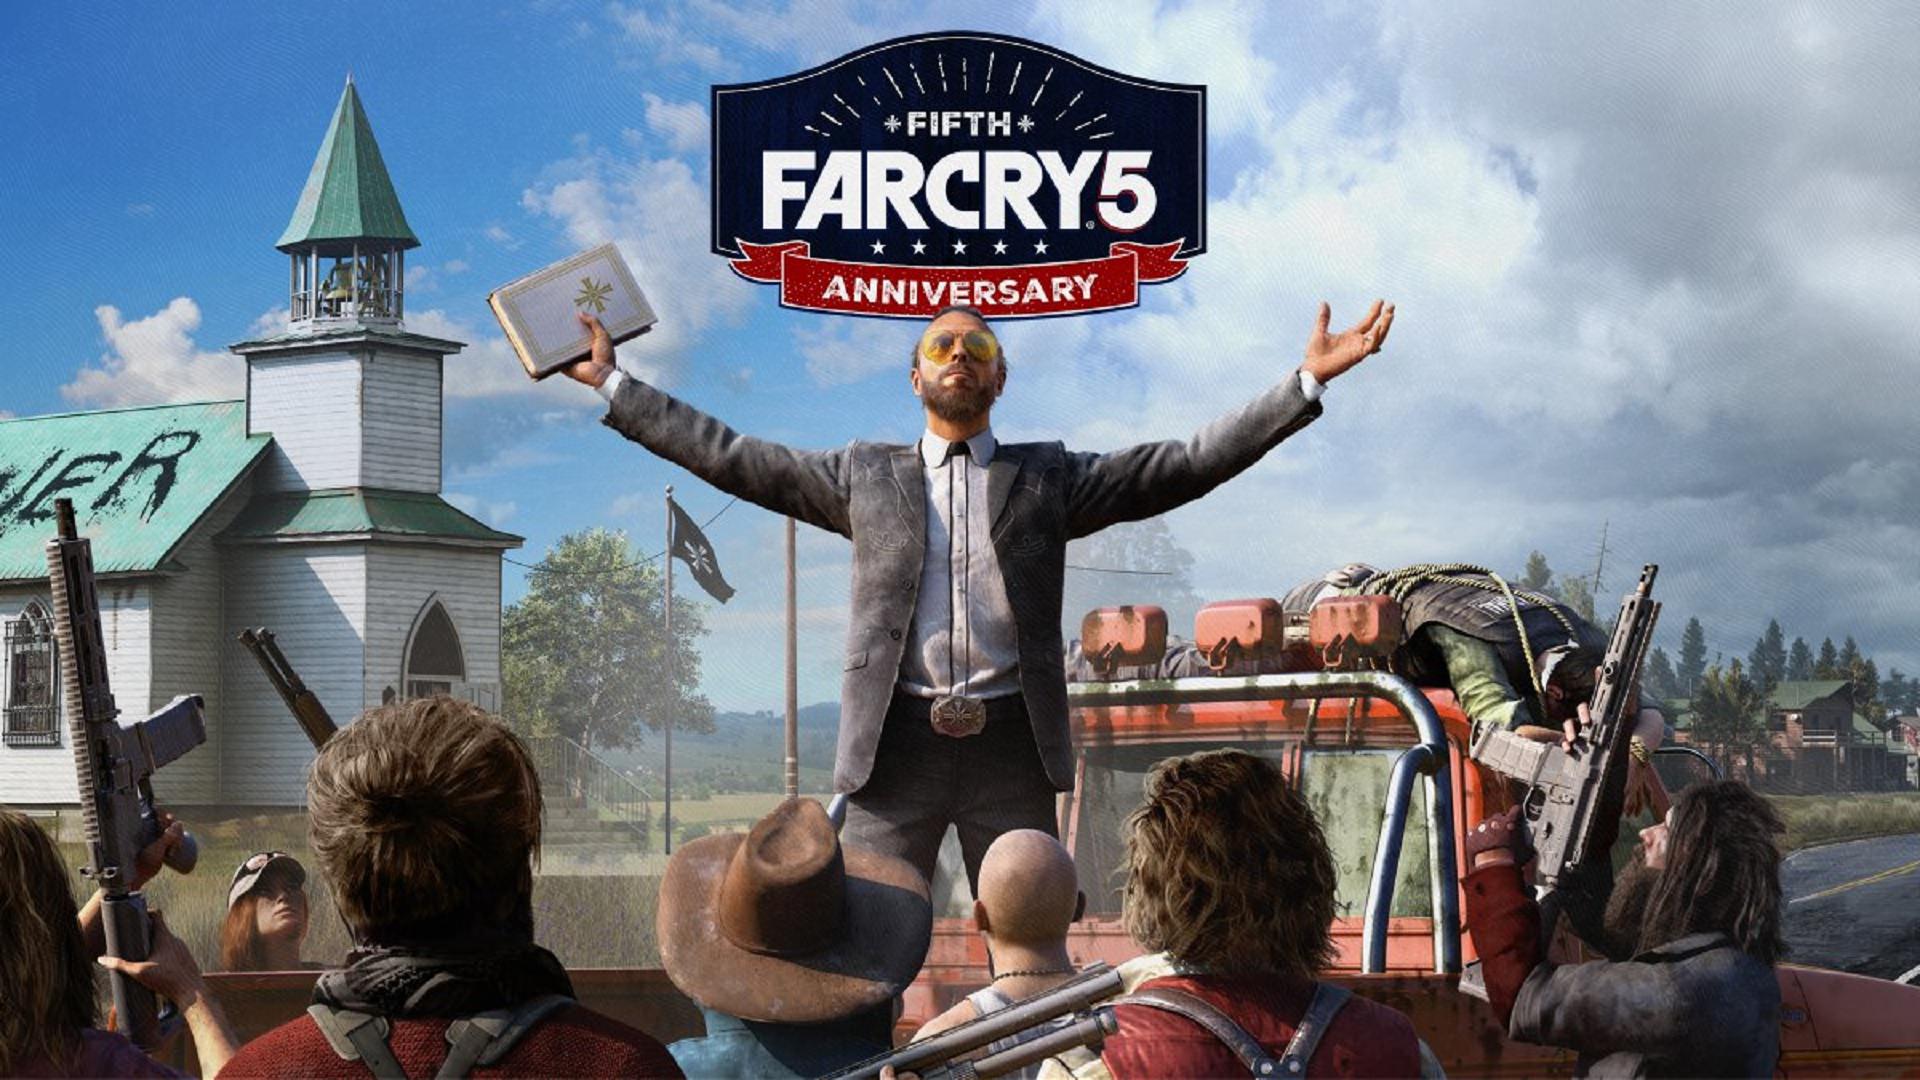 farcry 5 fifth anniversary  Image of farcry 5 fifth anniversary